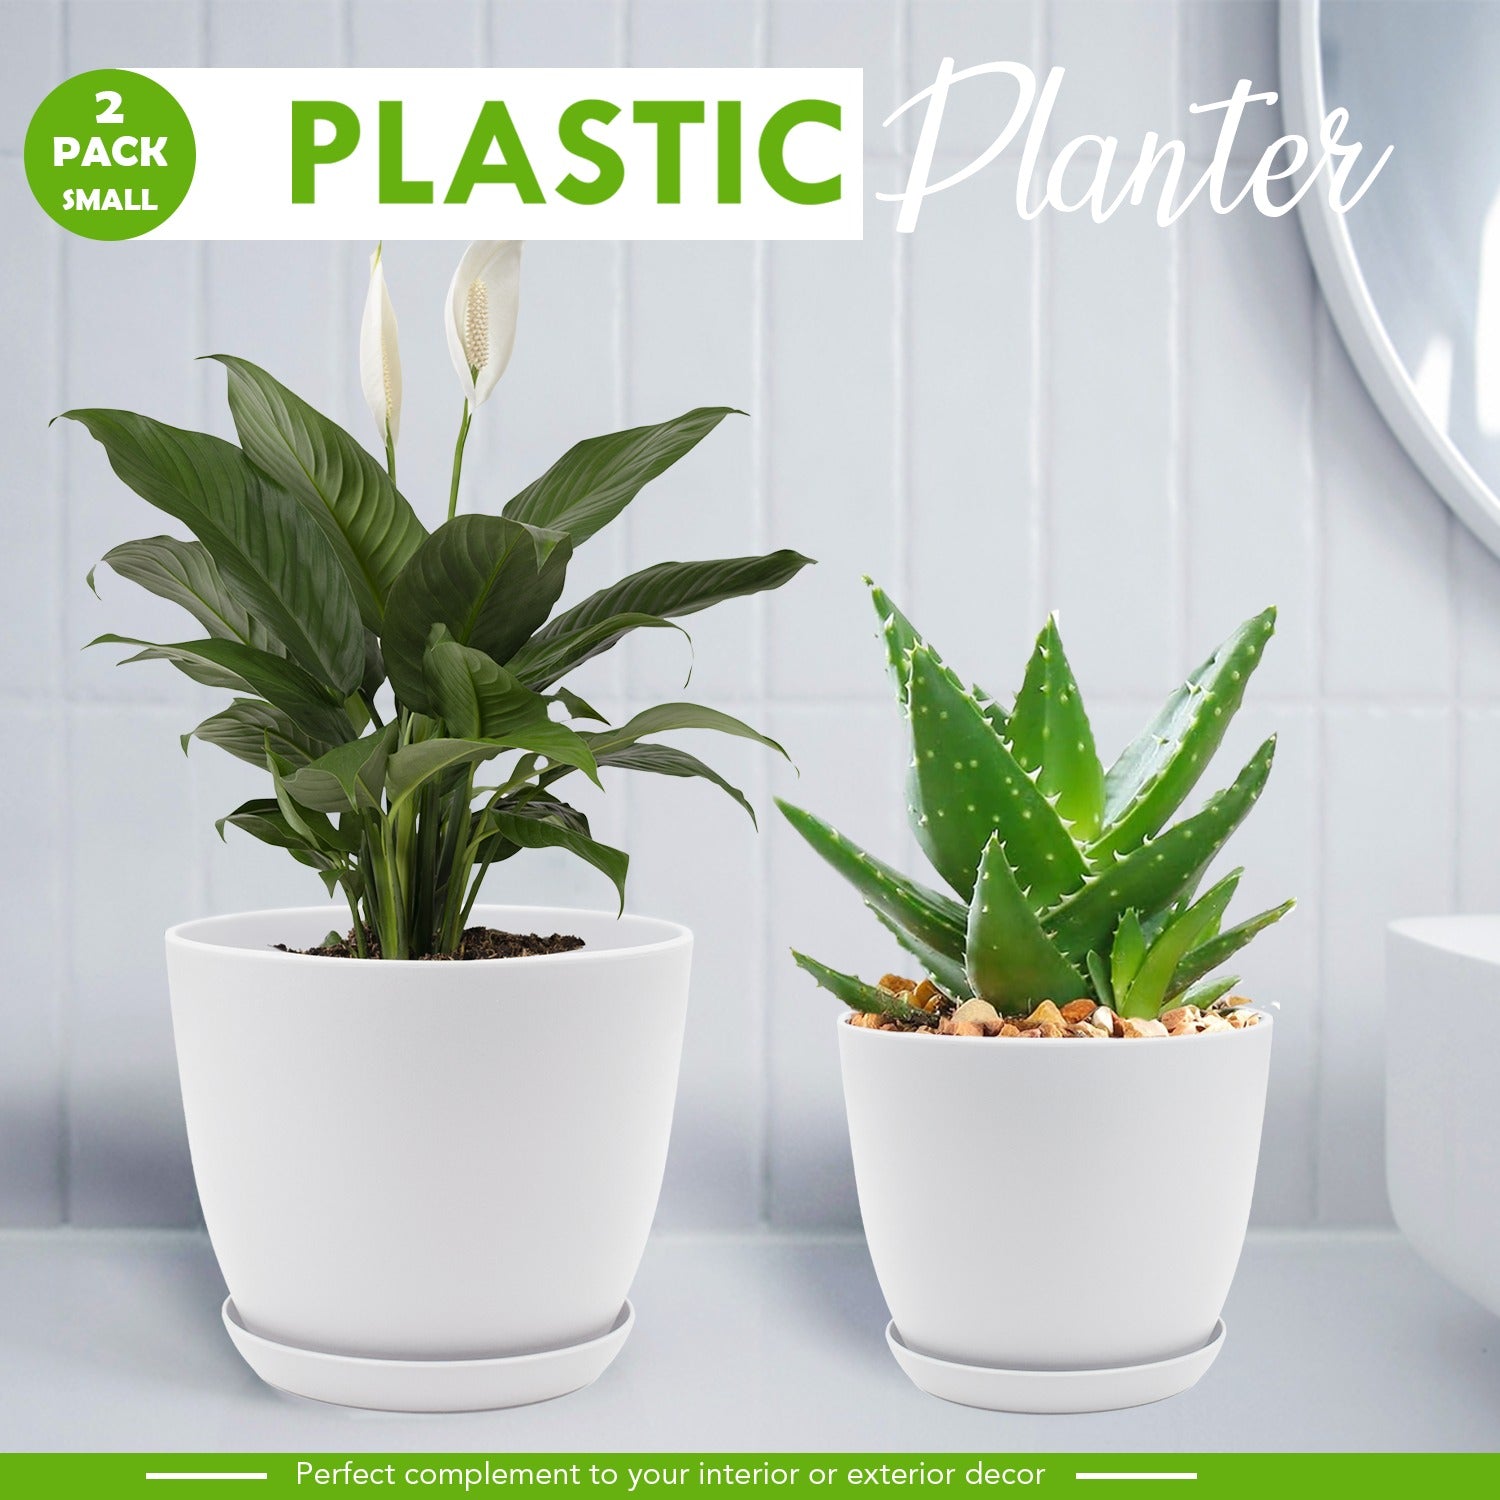 Fast-Forward-Decorative Flower Pots with Drainage - Set of 2 Plastic Planters for Indoor Plants